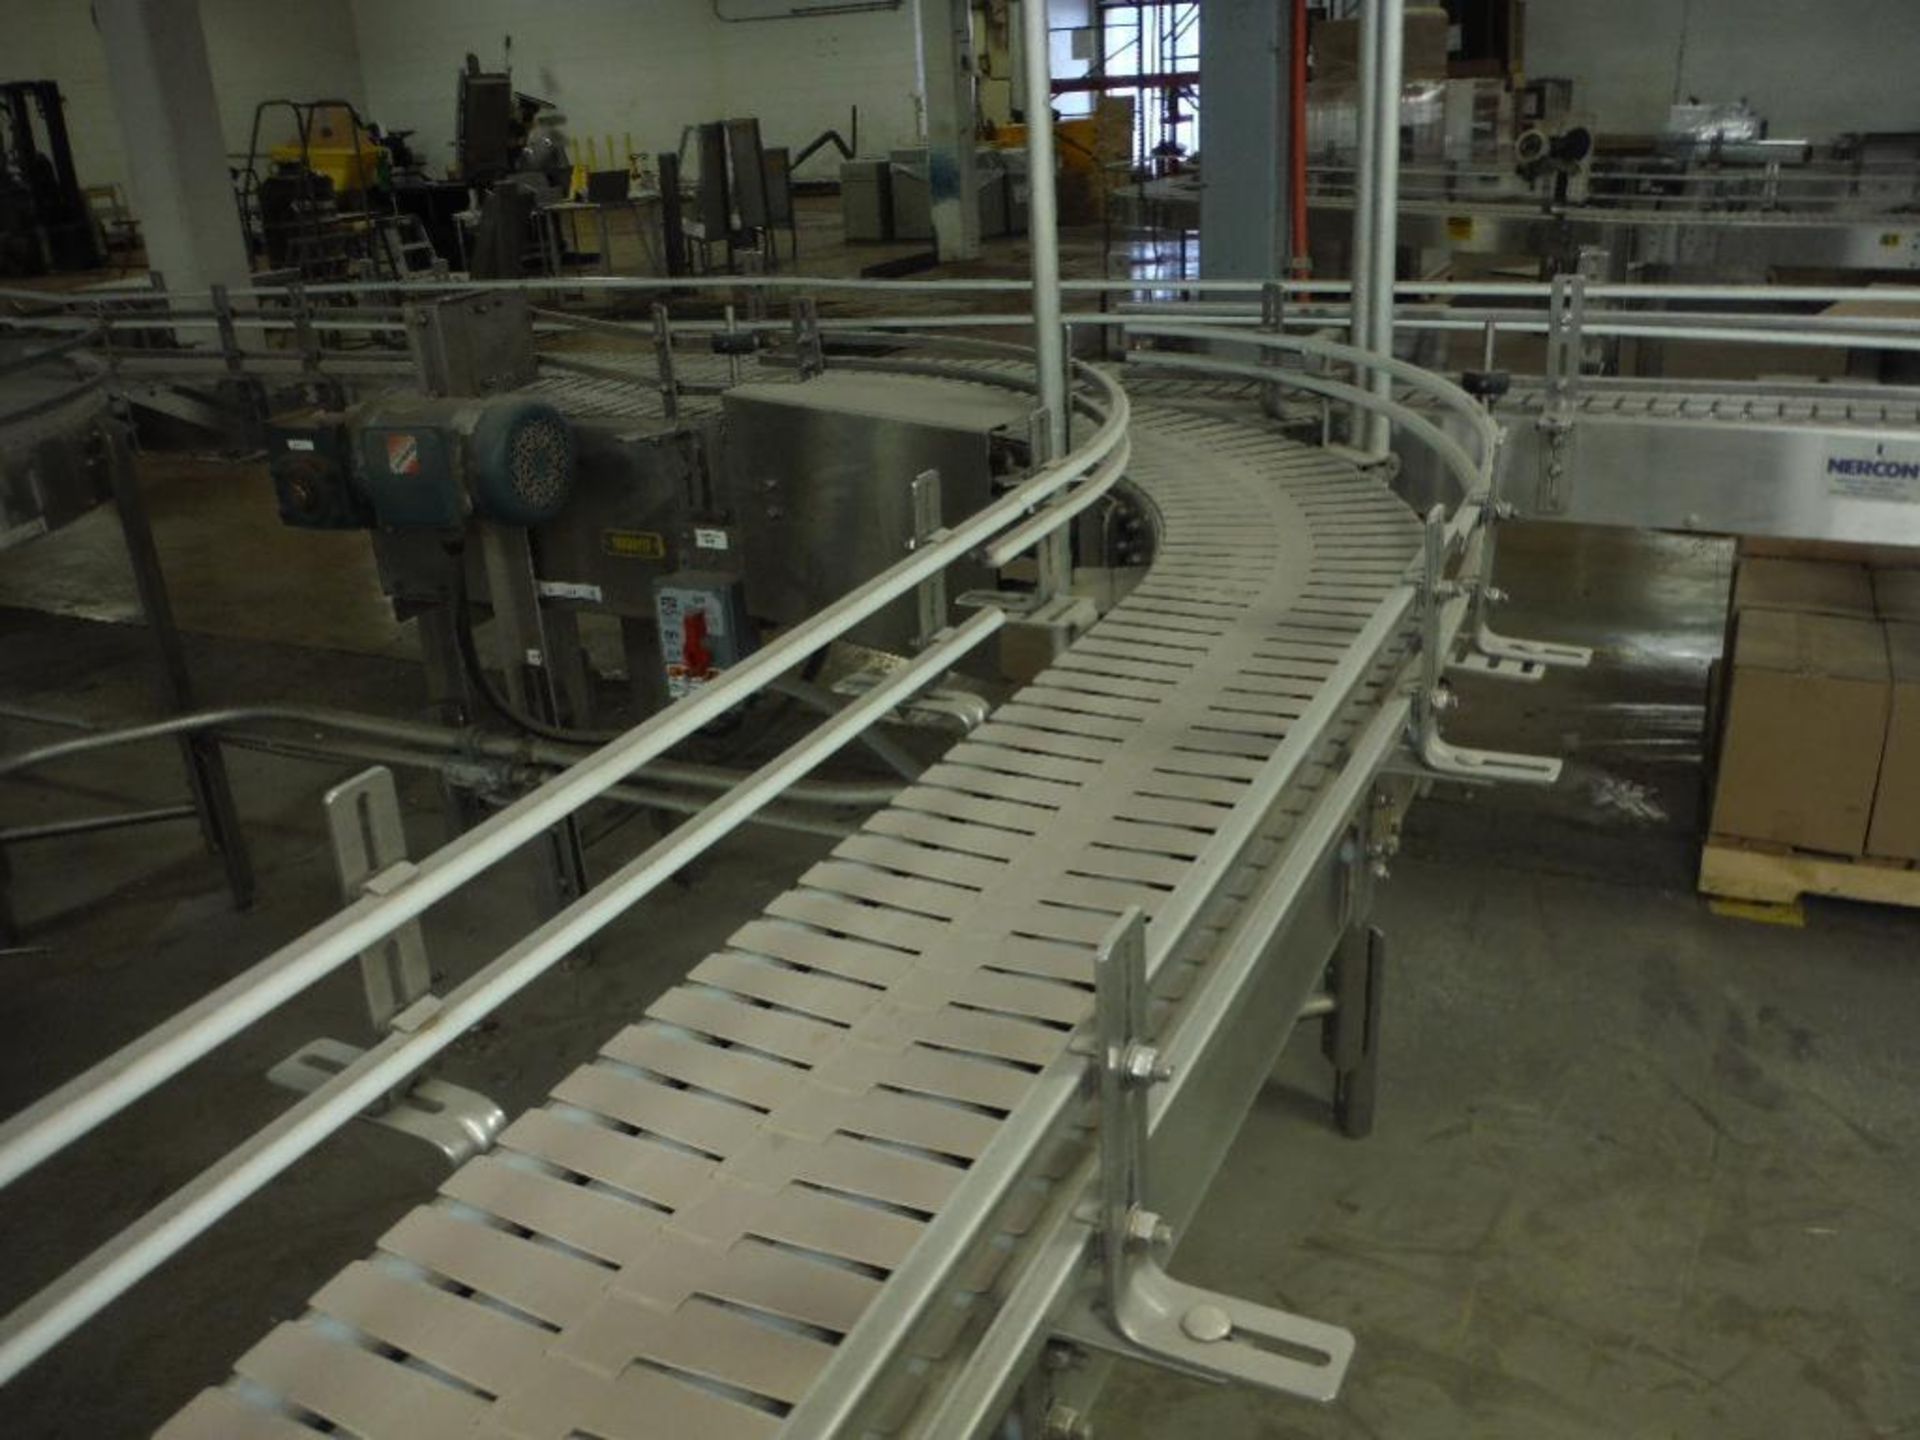 Nercon SS 180 degree conveyor, U-shape 40 ft. x 10 in. table top chain, w/ motor and drive. Rigging - Image 5 of 8